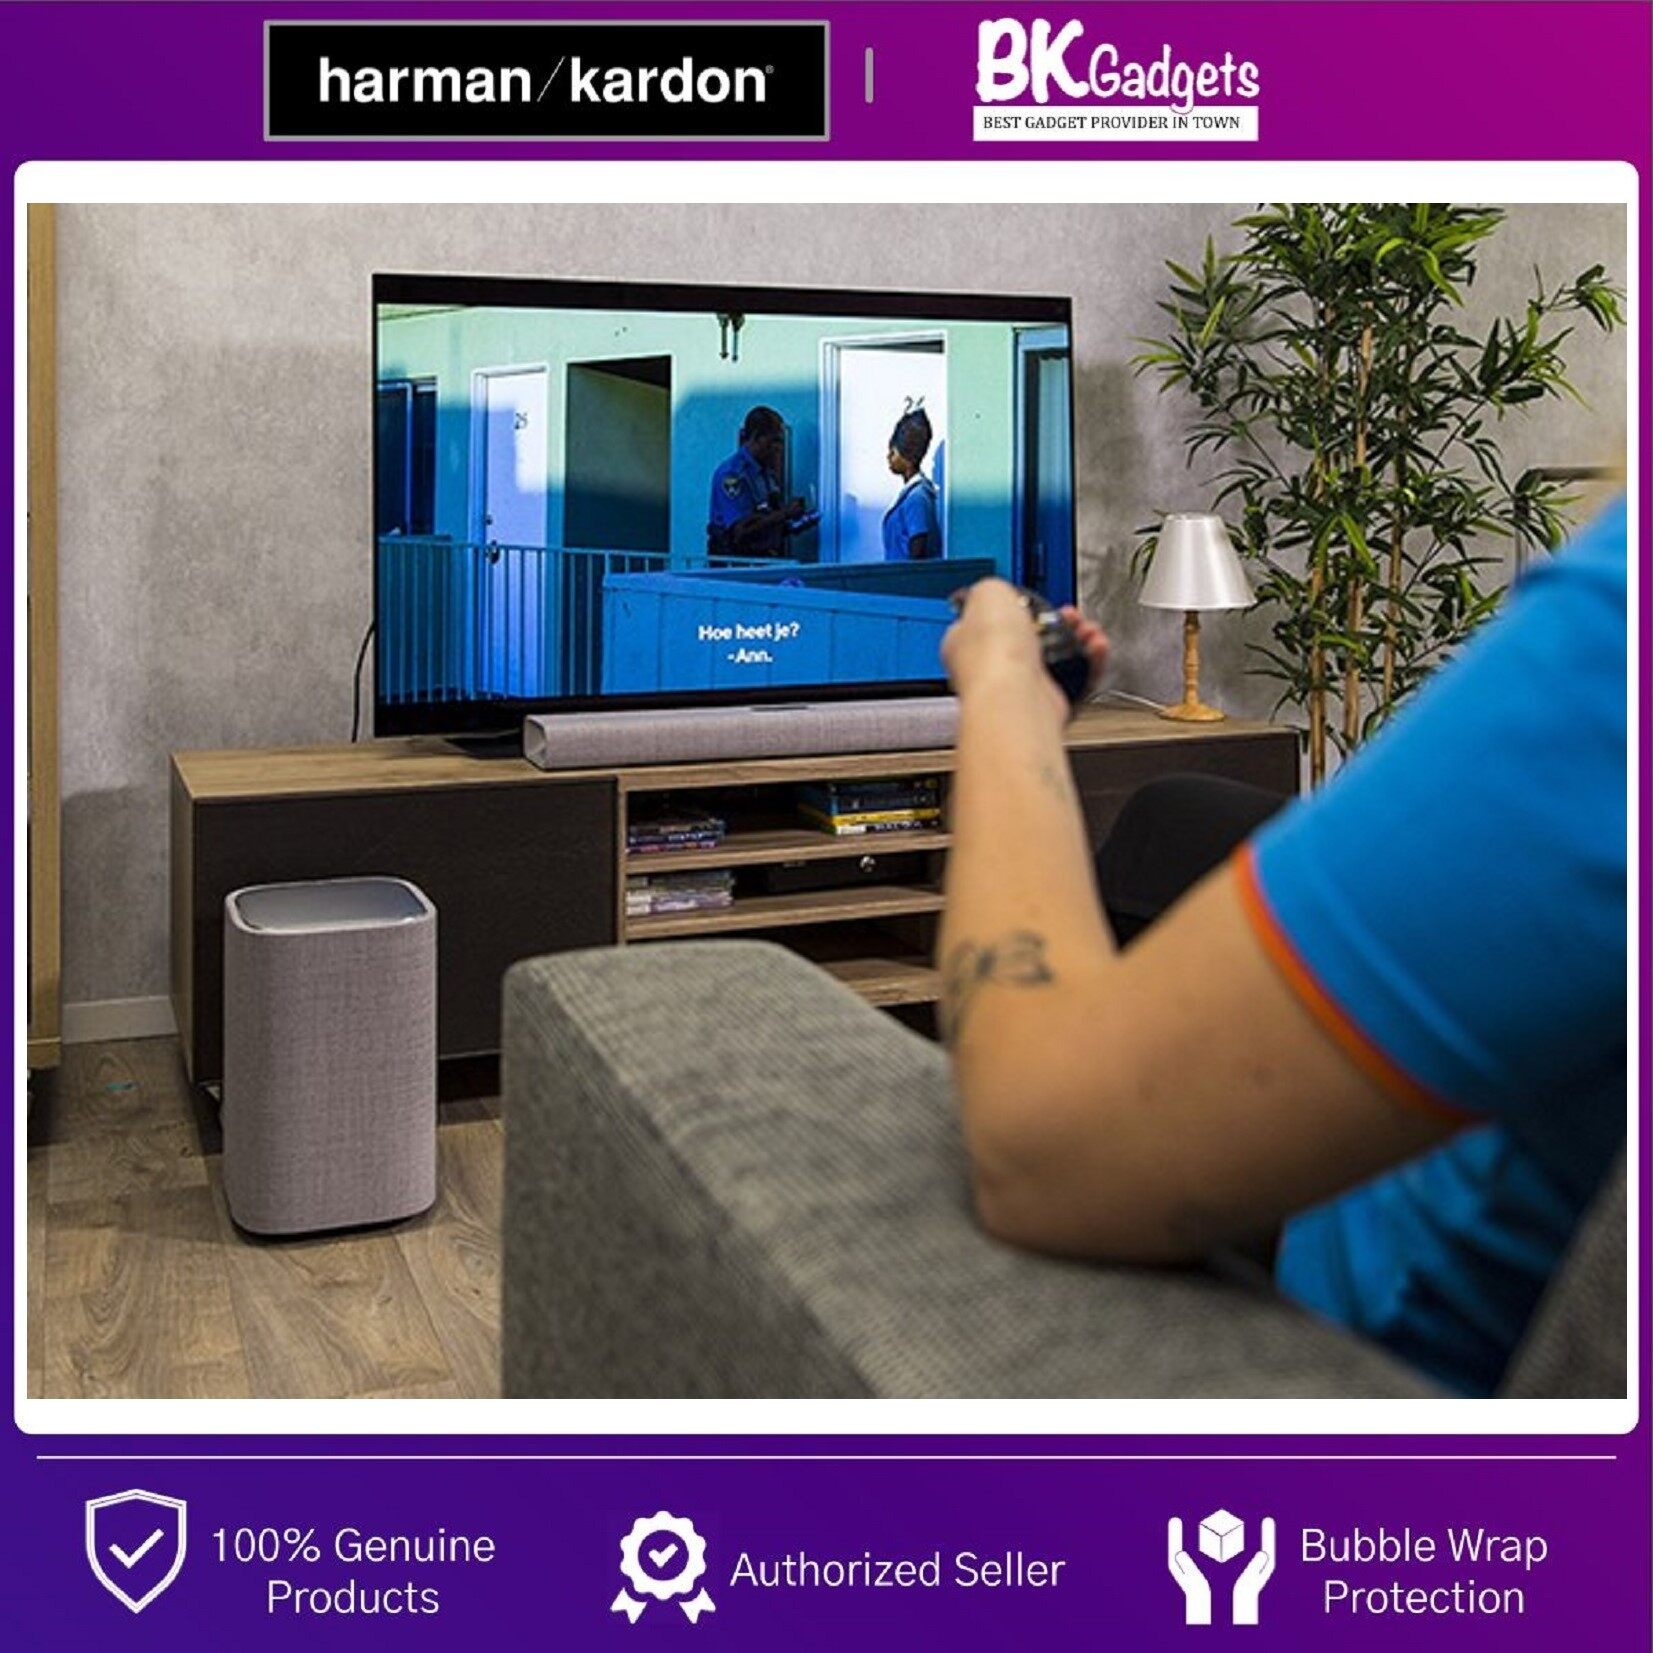 Harman Kardon Citation Sub S Compact Wireless Subwoofer with Deep Bass | Easy Setup with Wireless Connectivity